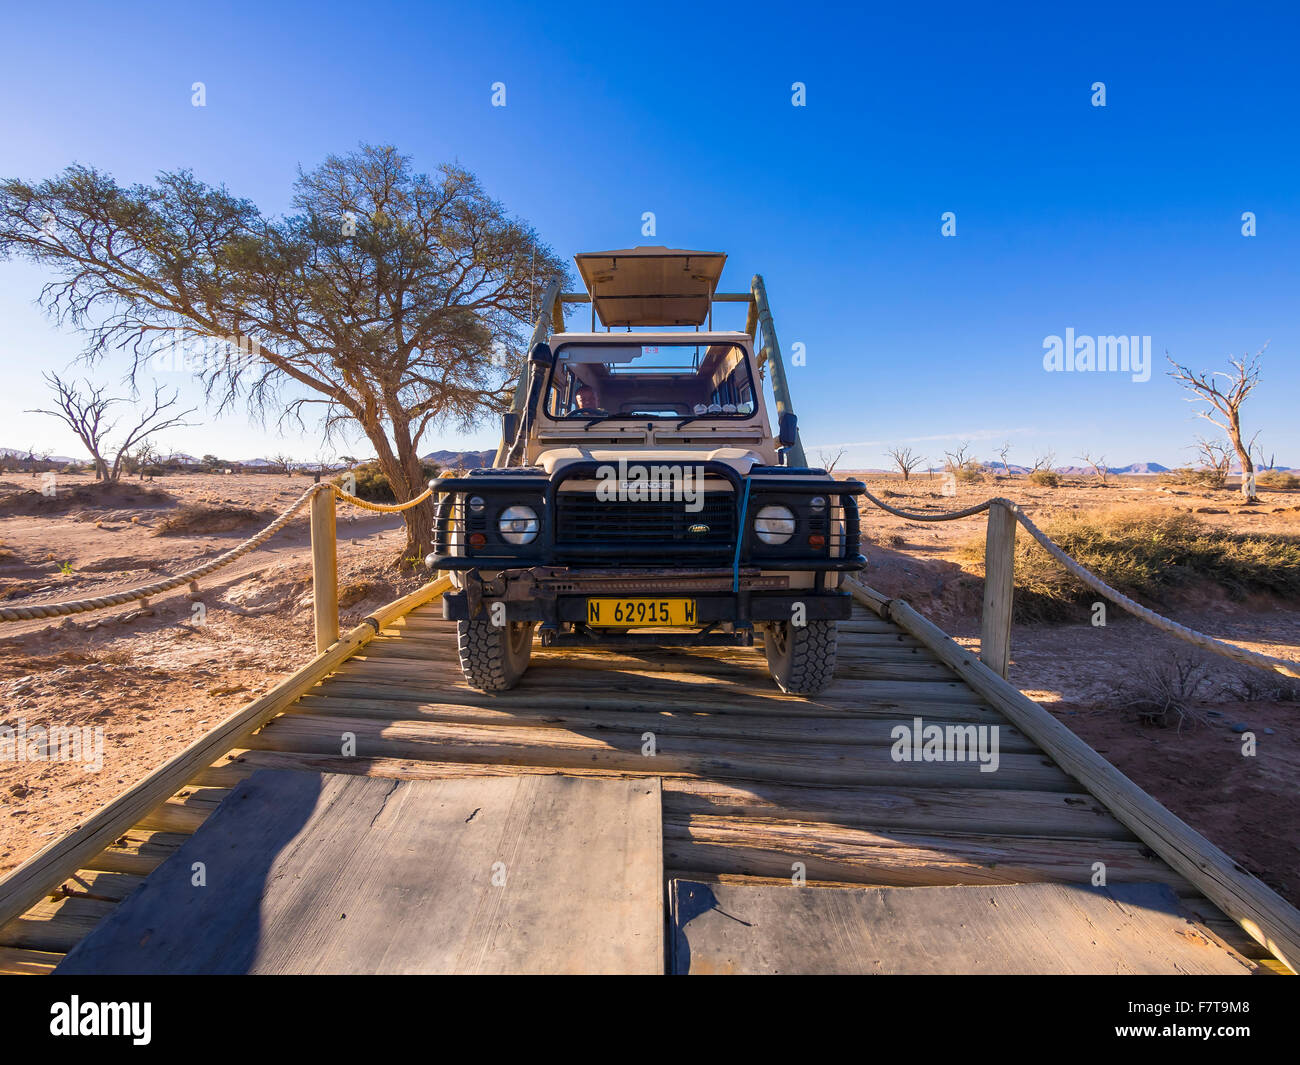 Land Rover crossing a wooden bridge in the Kulala Wilderness Reserve on the edge of the Namib Desert, Hardap Region, Namibia Stock Photo